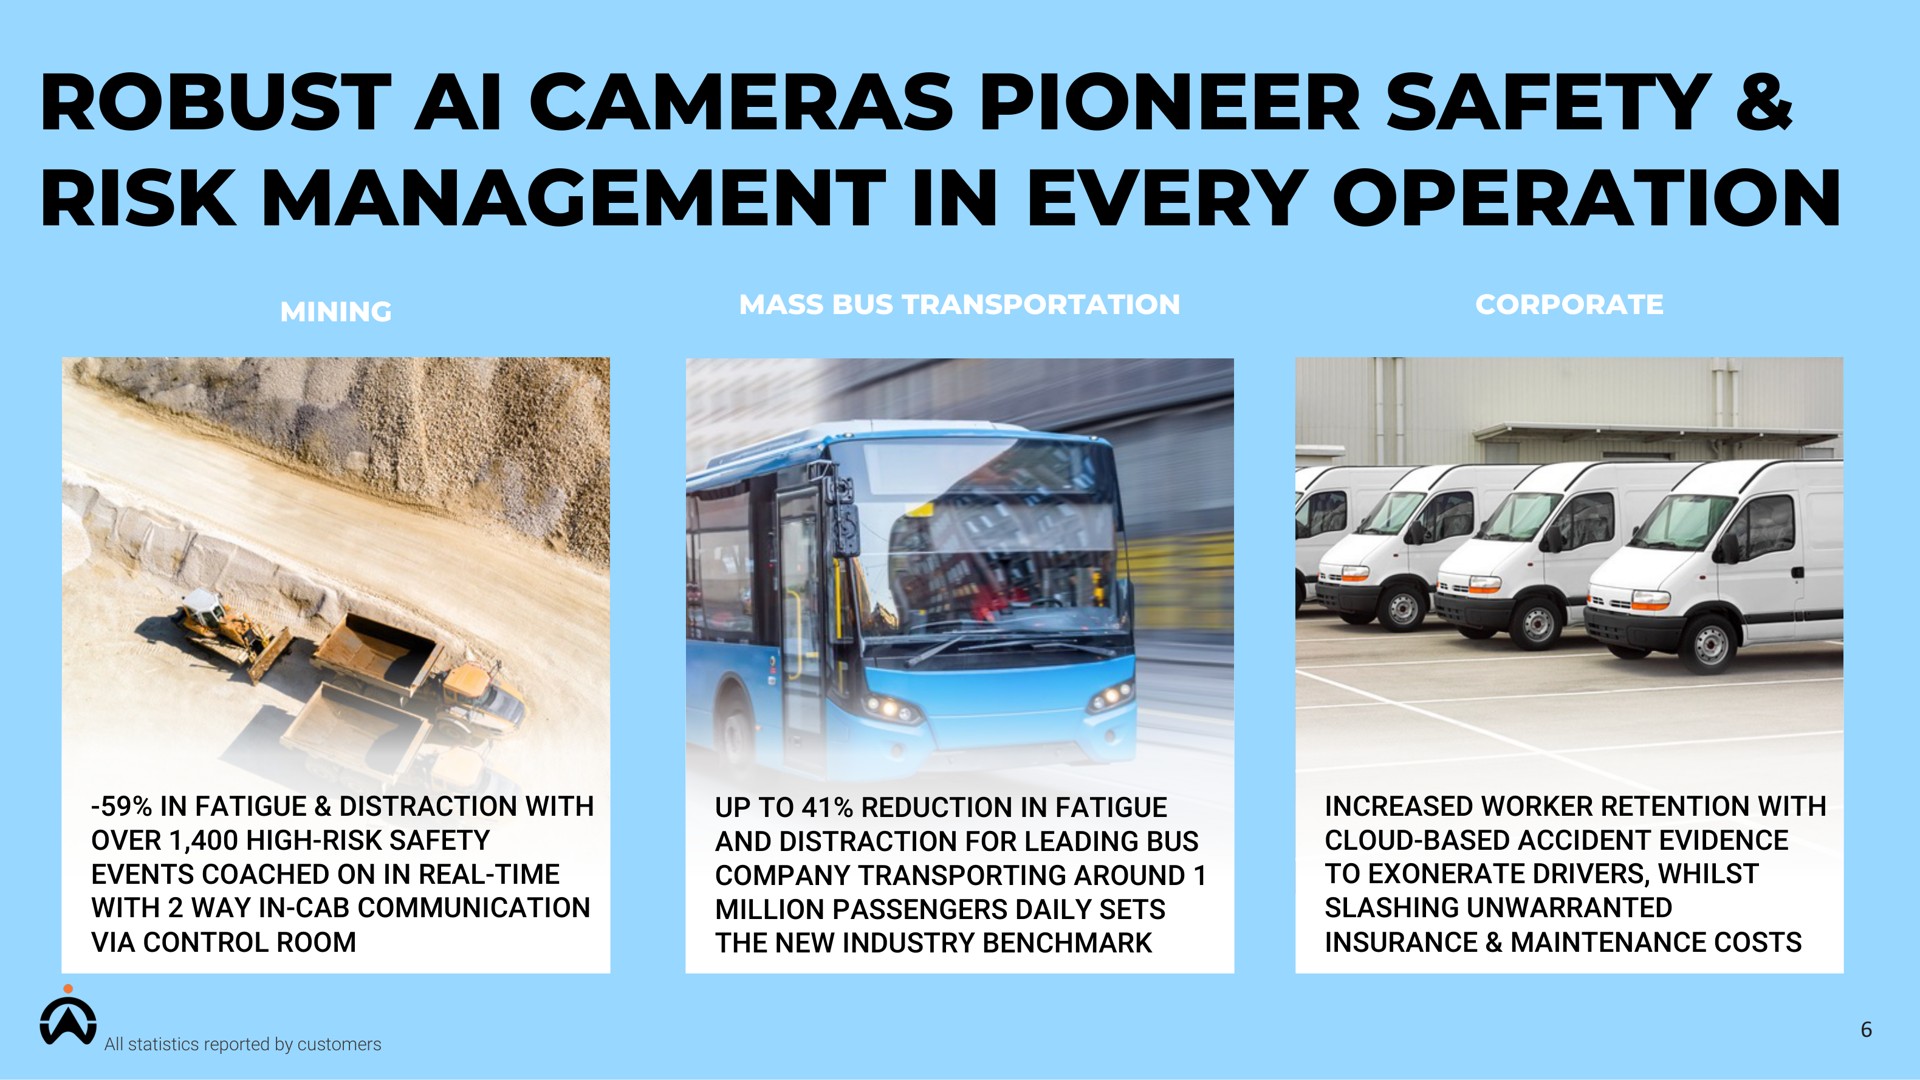 robust cameras pioneer safety risk management in every operation | Karooooo